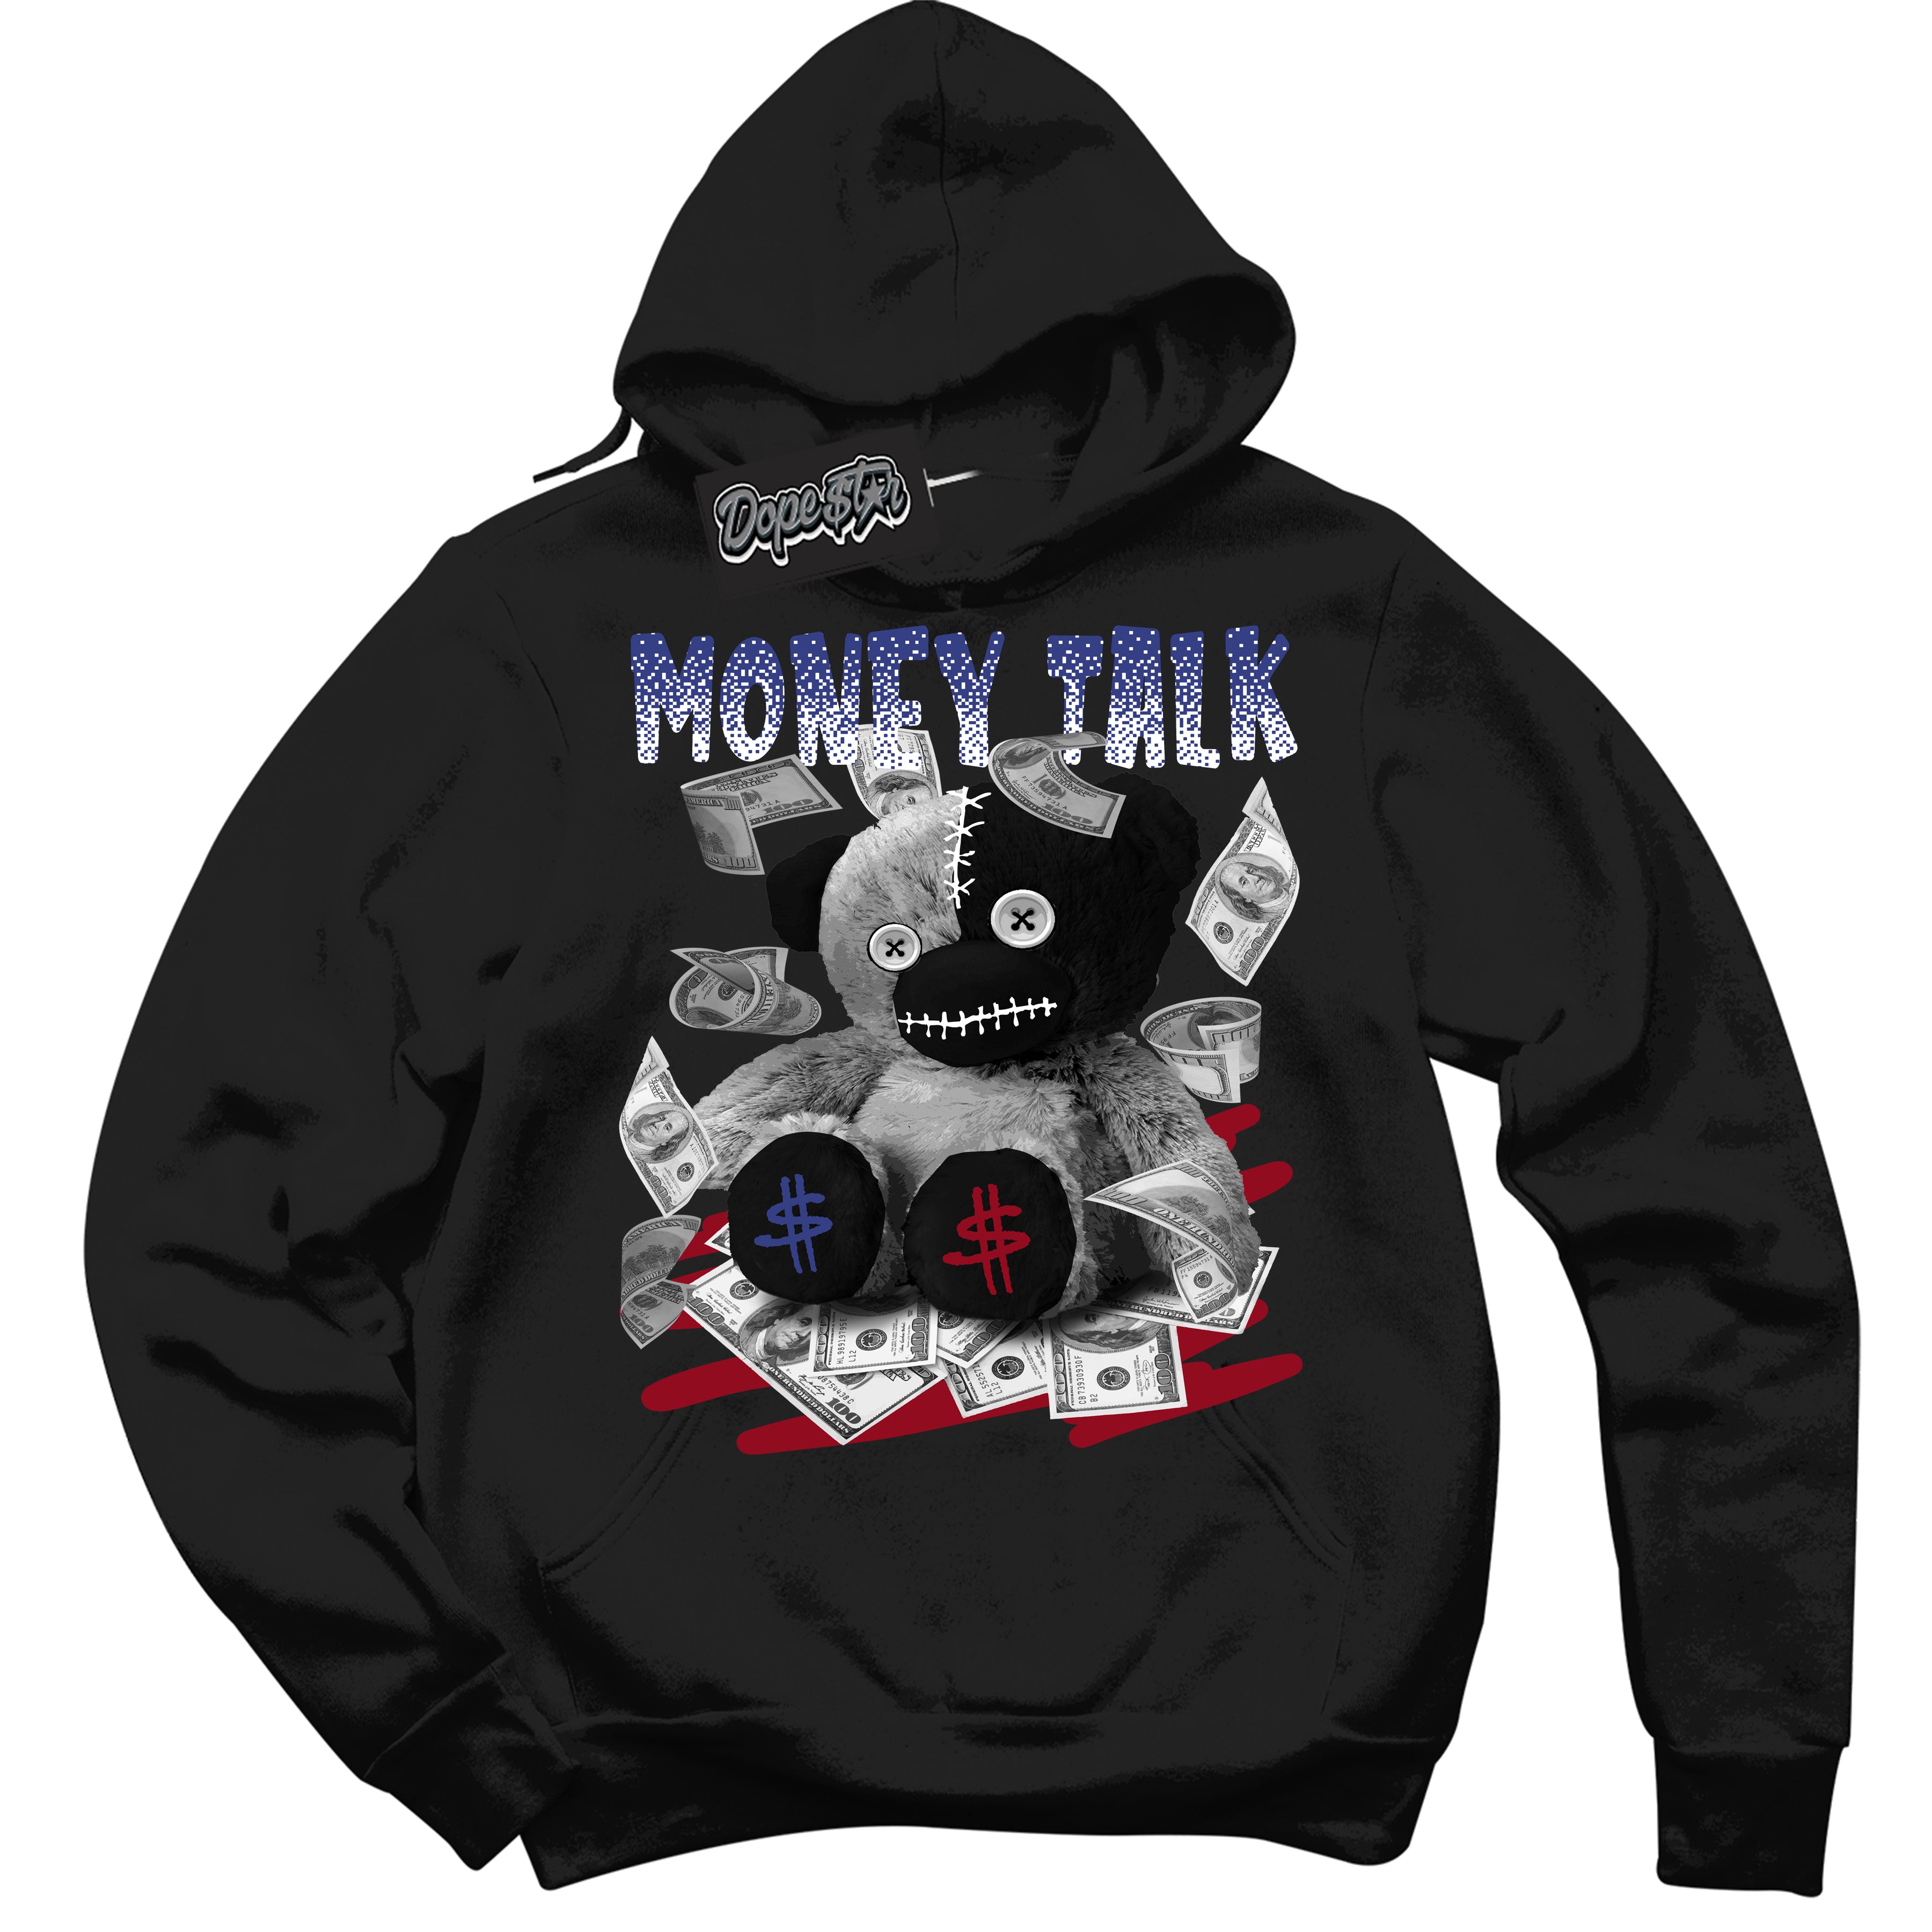 Cool Black Hoodie with “ Money Talk Bear ”  design that Perfectly Matches Playoffs 8s Sneakers.